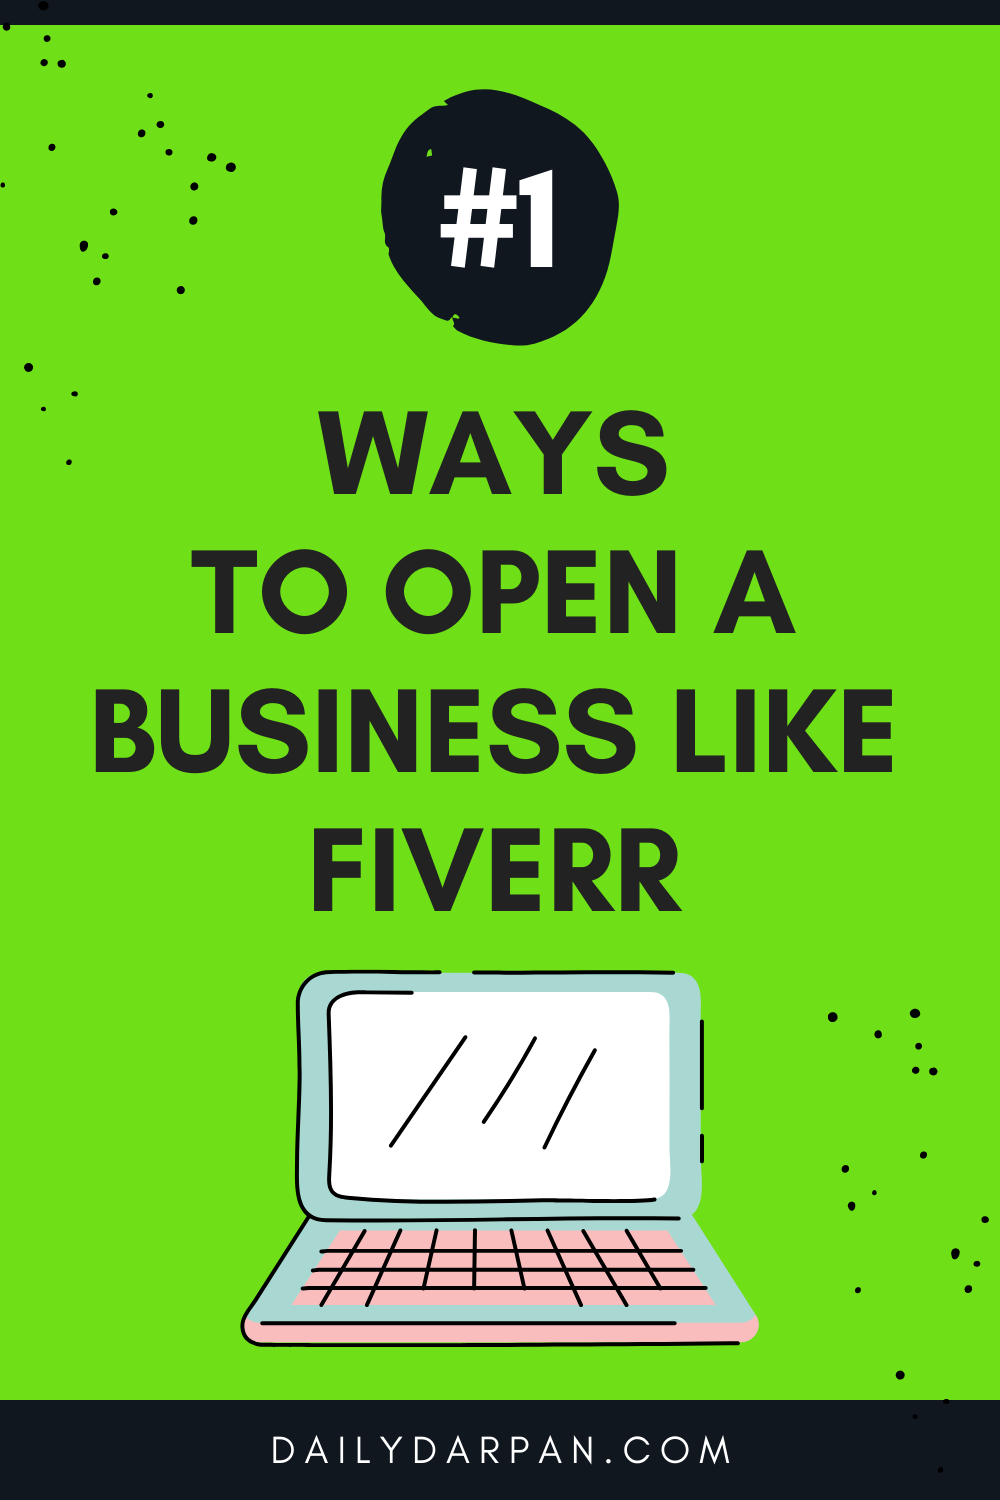 Ways to Open a bUsiness like fiverr